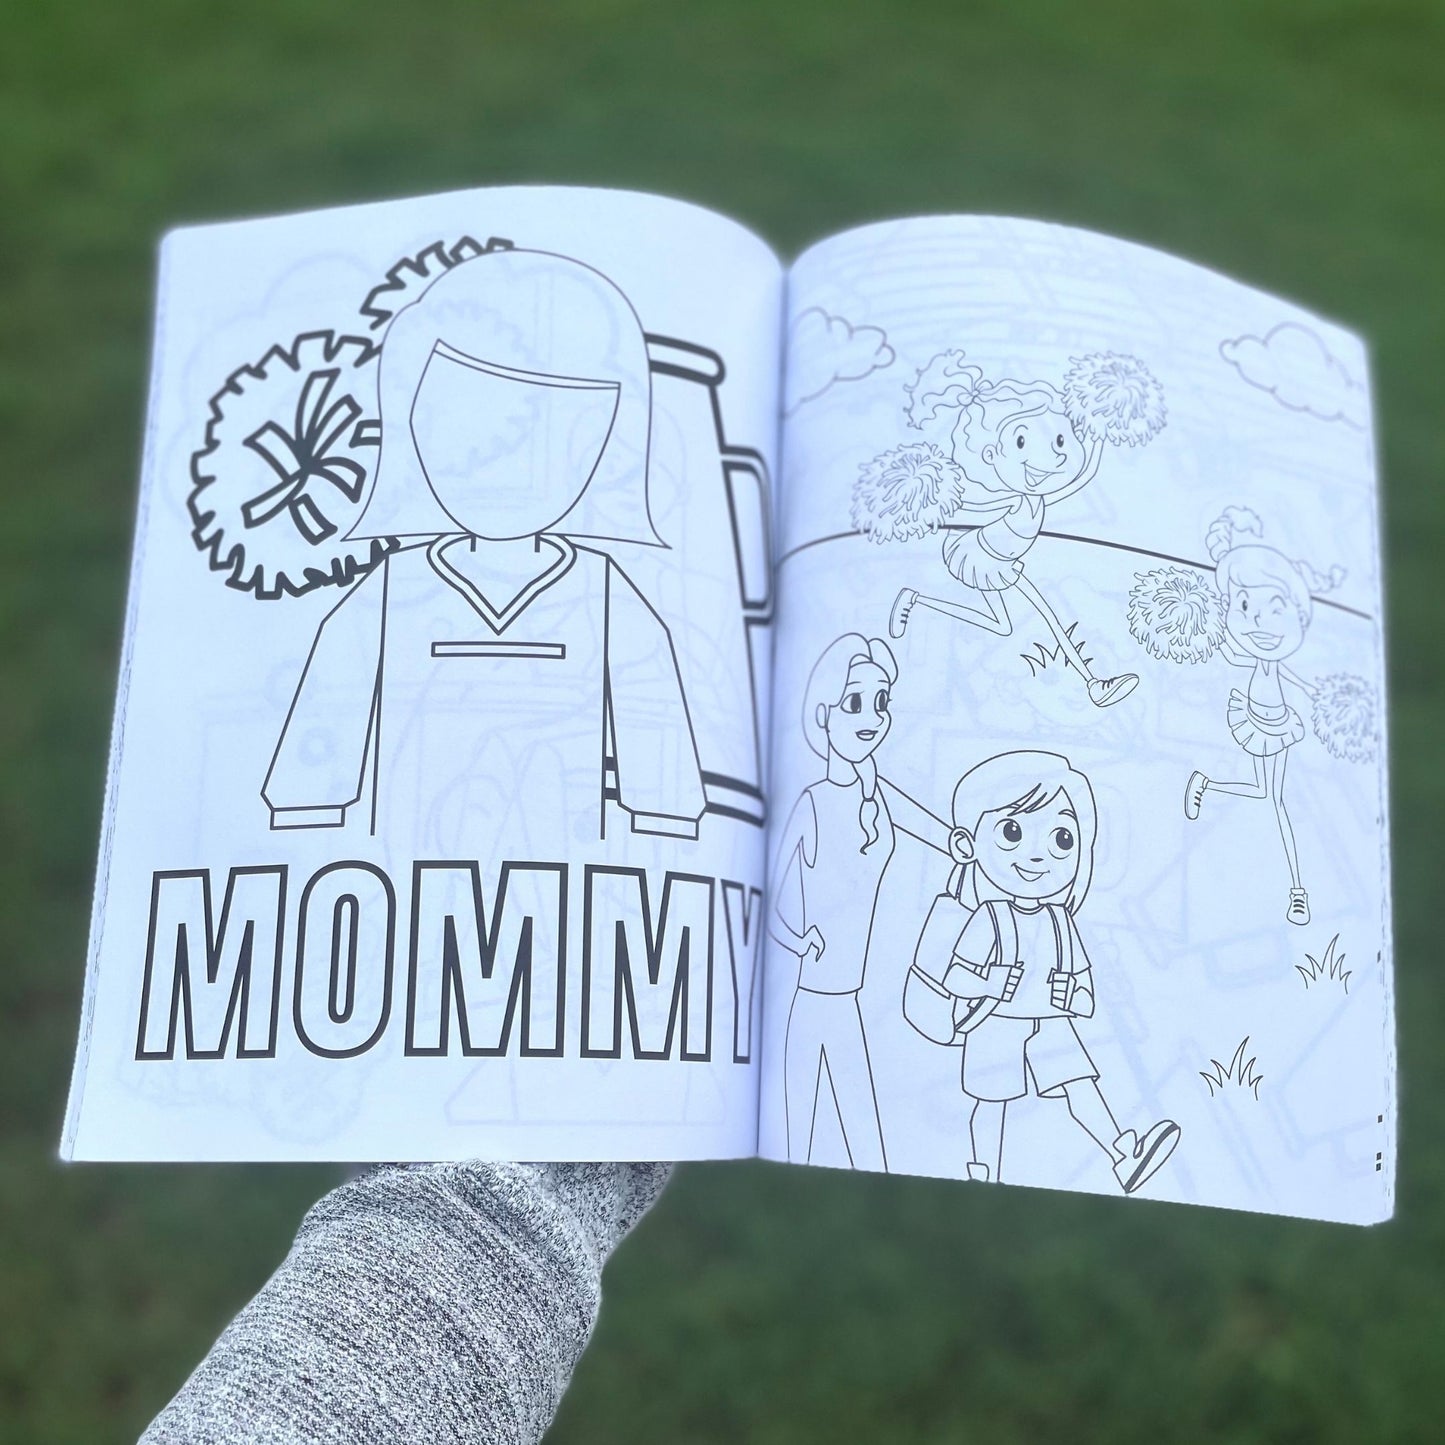 So Your Mom Is A Cheer Coach: A Coloring and Activity Book for the Coach's Kid